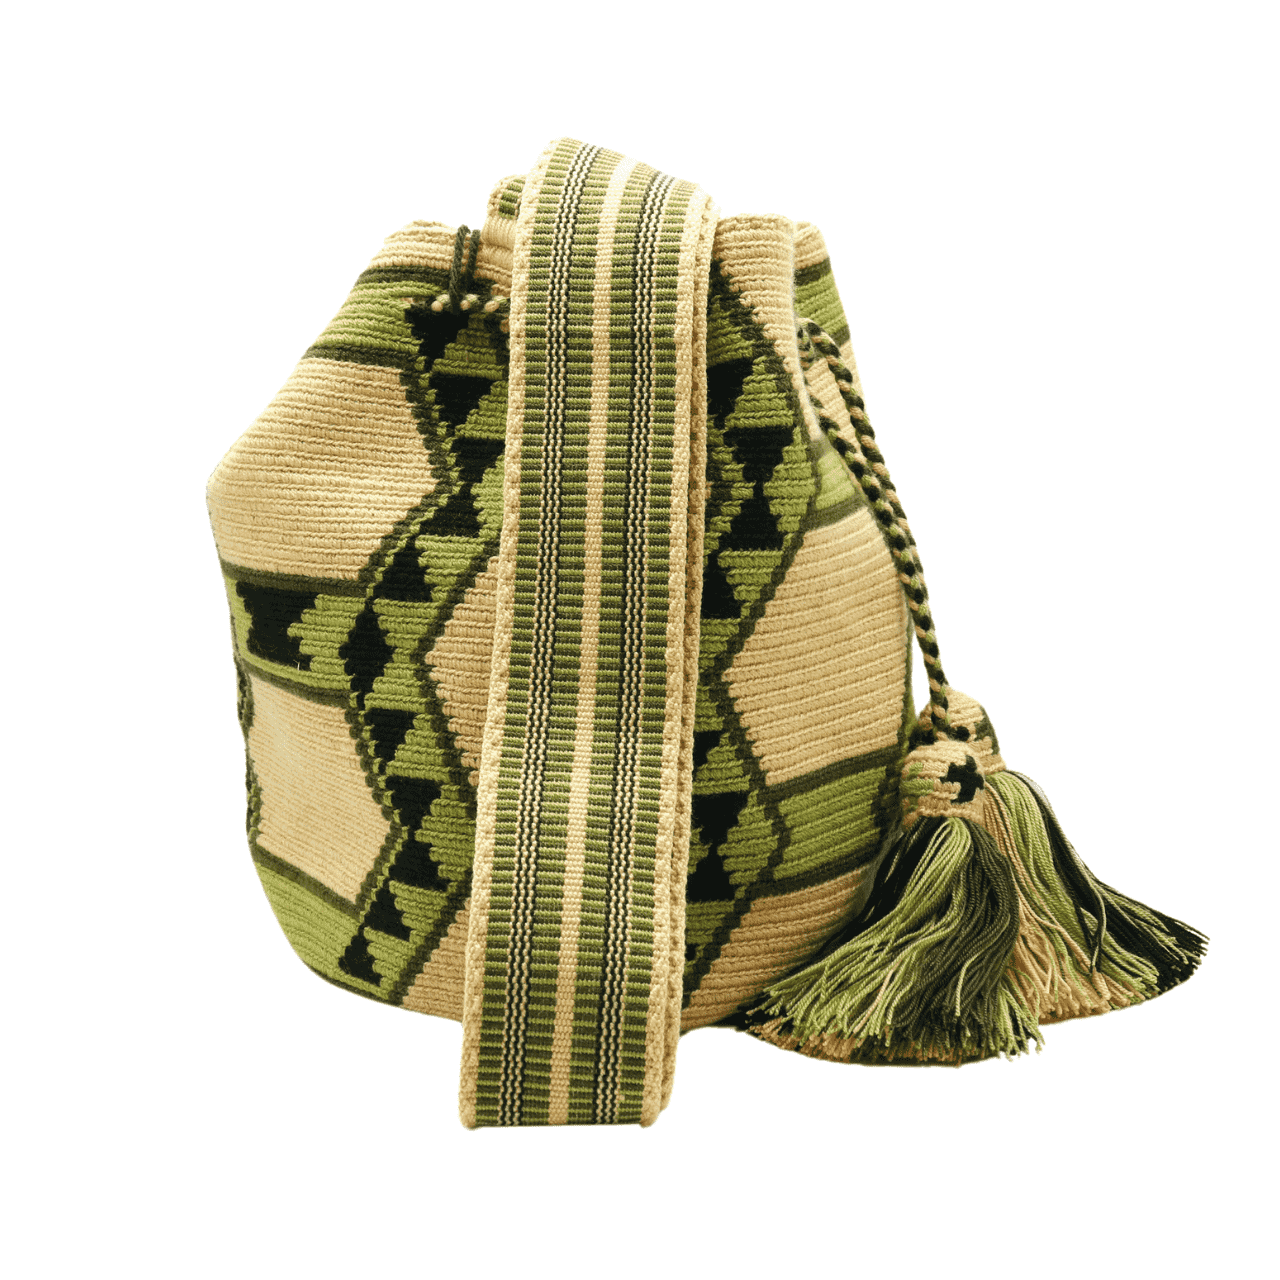 Lottie Wayuu Bag - A favorite choice, handcrafted in Colombia, featuring a stunning combination of beige and greens with a unique and captivating pattern.